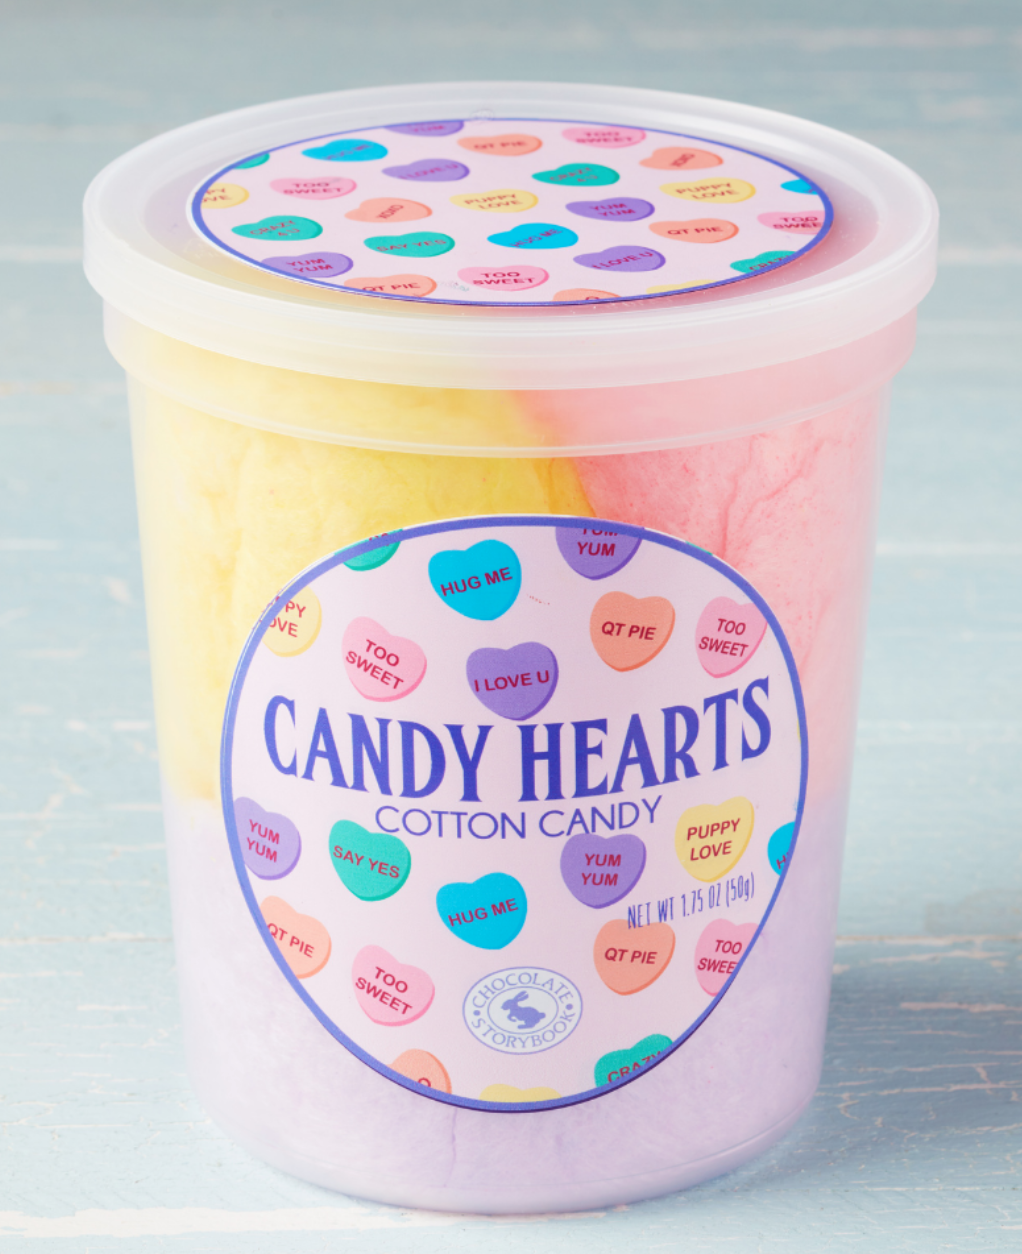 Cotton Candy - Candy Hearts